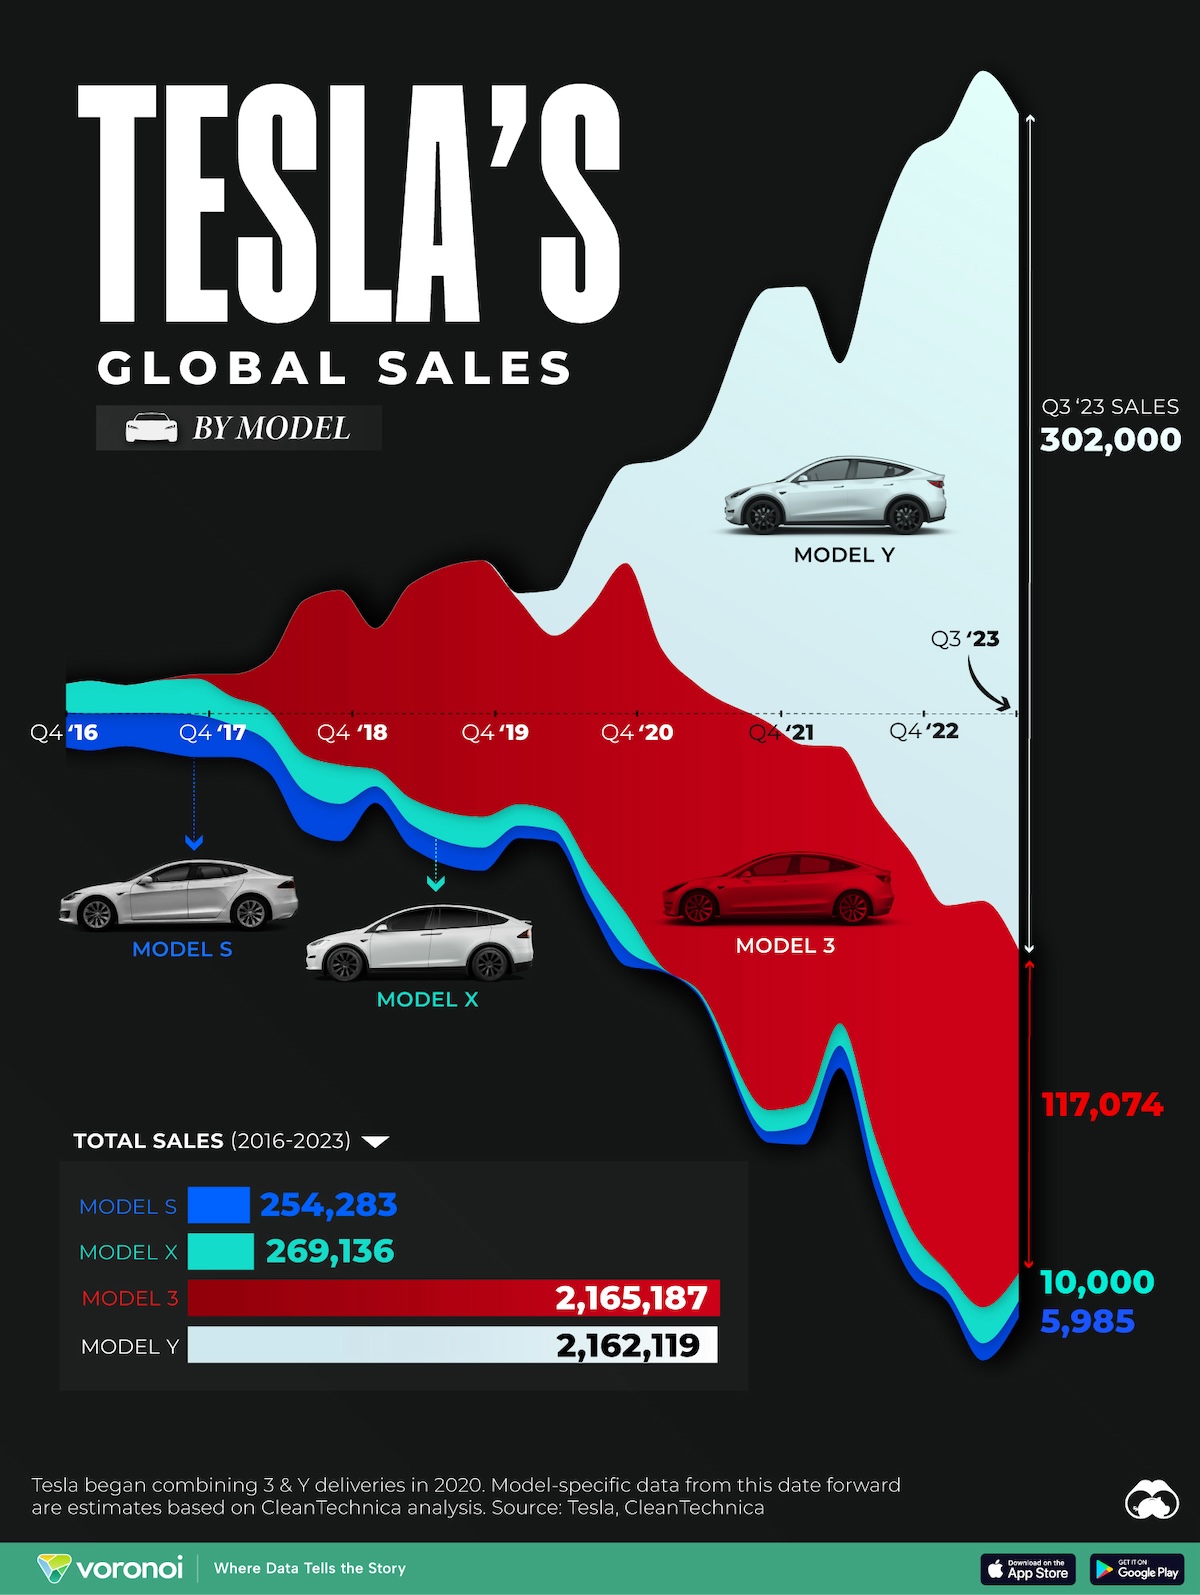 A chart showing how the model mix in tesla's global sales numbers has slowly changed from its luxury lineup to cheaper, high-volume cars.